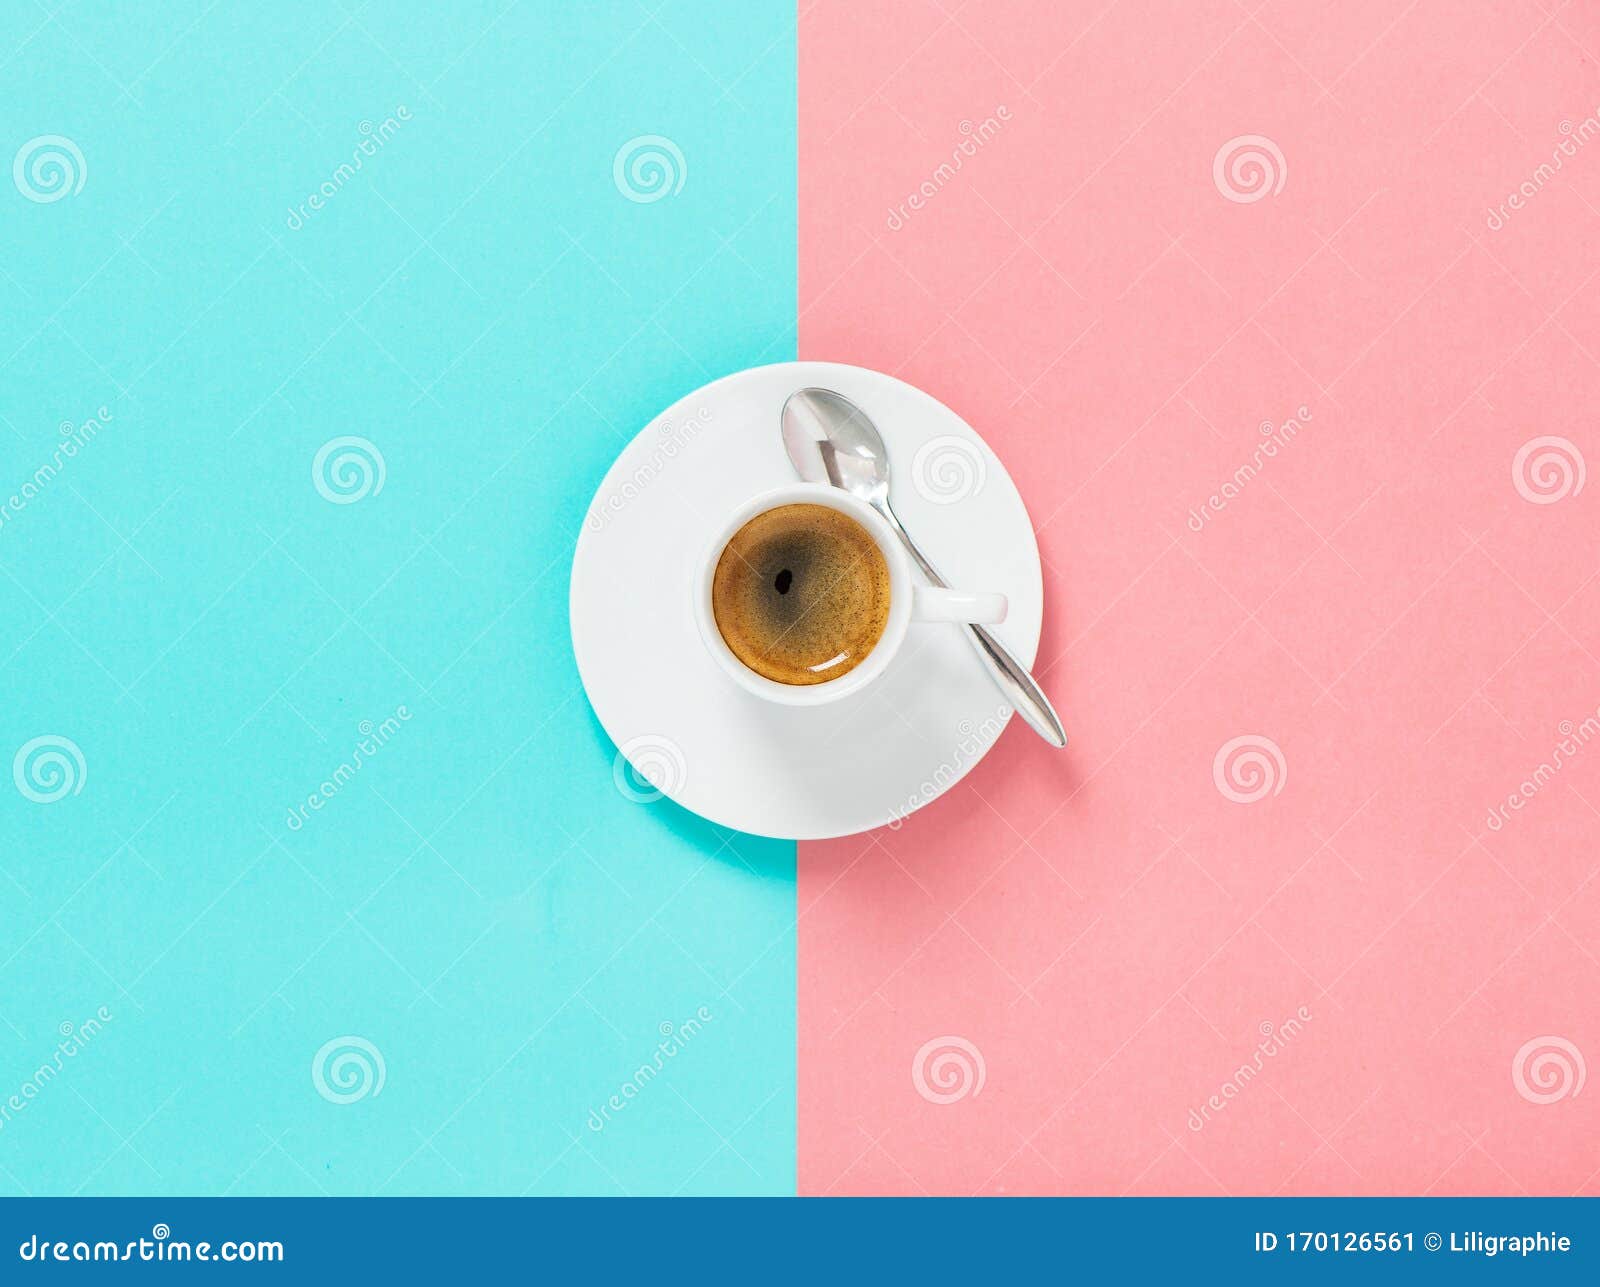 coffee pink blue background flat lay